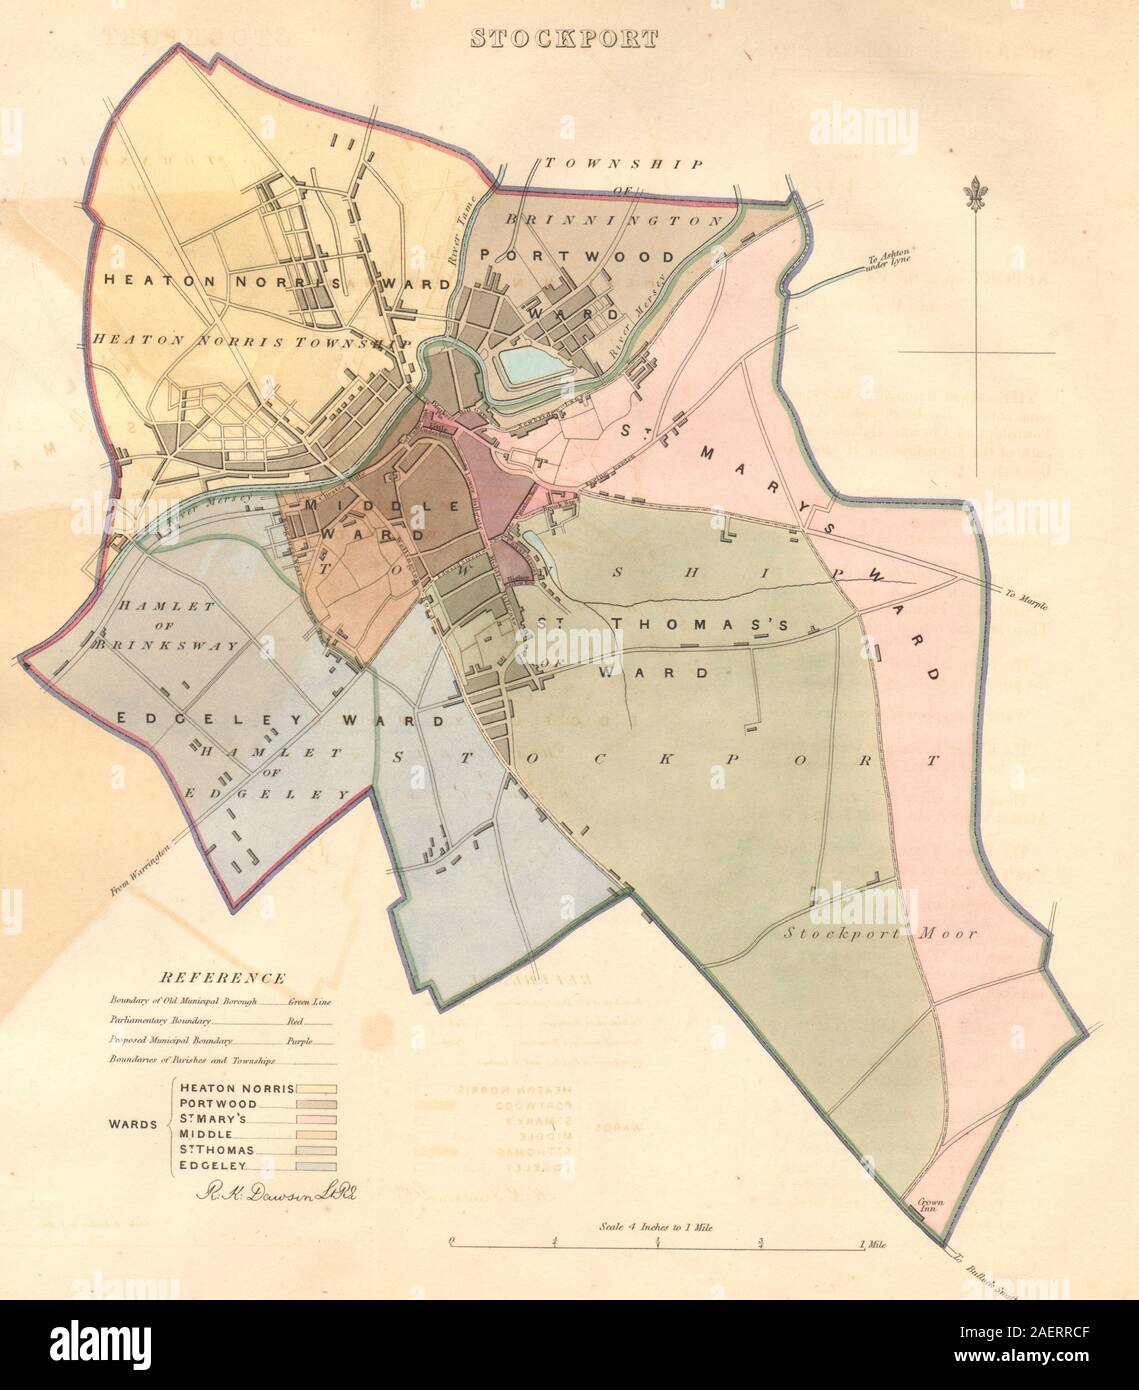 STOCKPORT borough/town plan. BOUNDARY COMMISSION. Manchester. DAWSON 1837 map Stock Photo